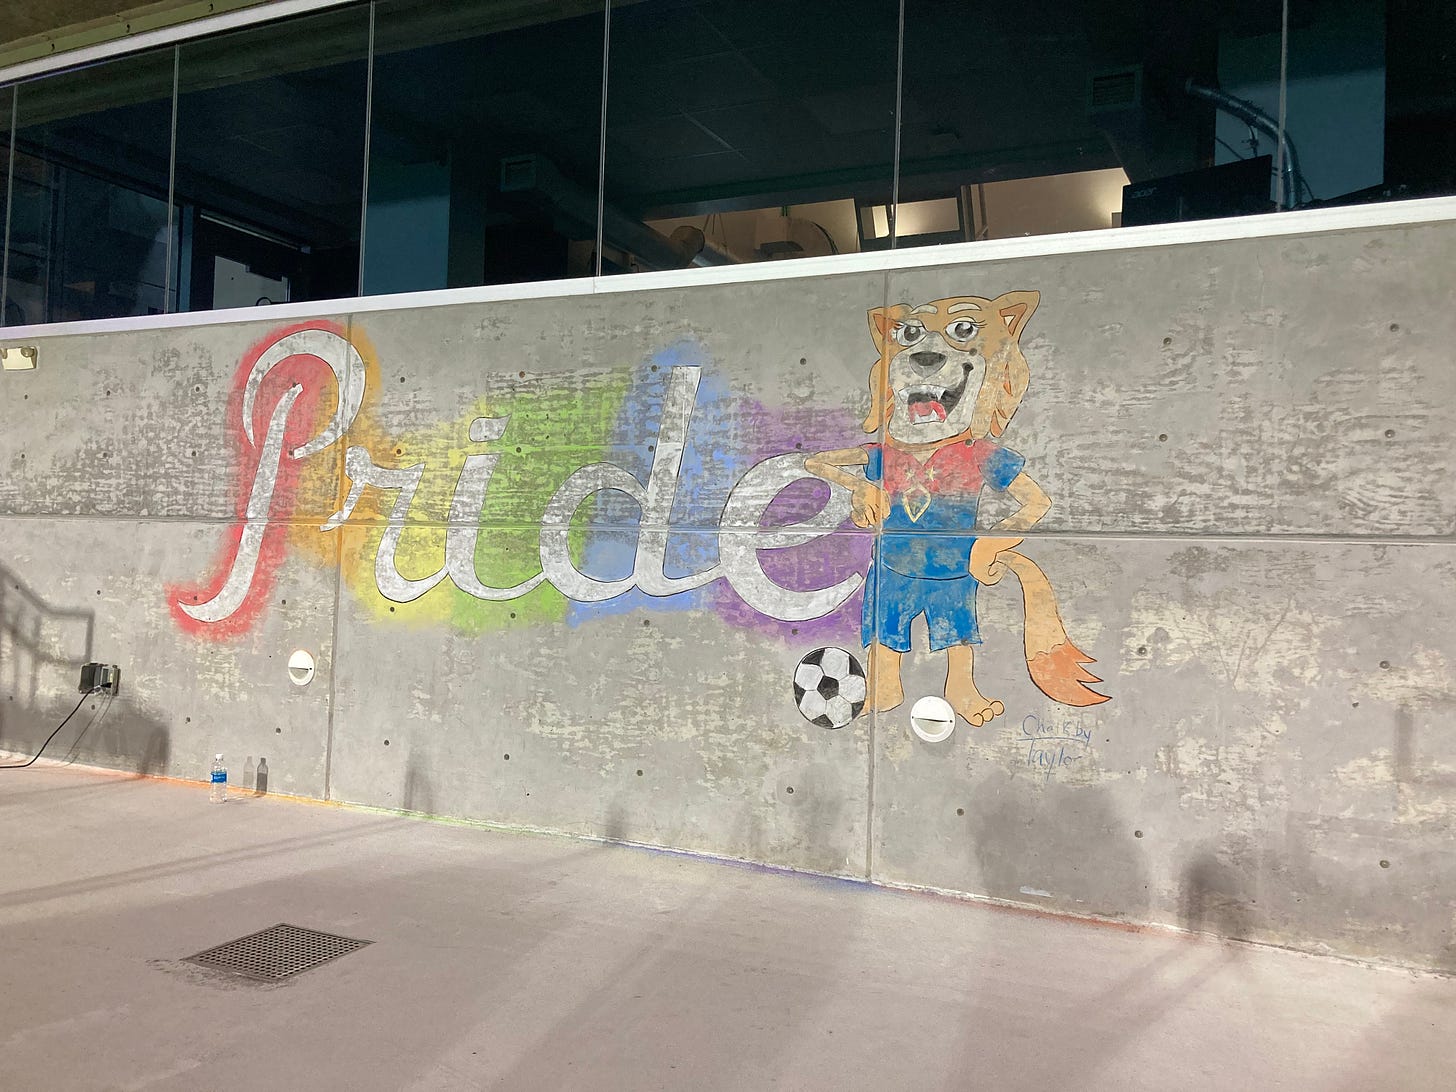 Pride in rainbow colored chalk along with a drawing of Roary, the North Carolina Courage mascot, with a soccer ball